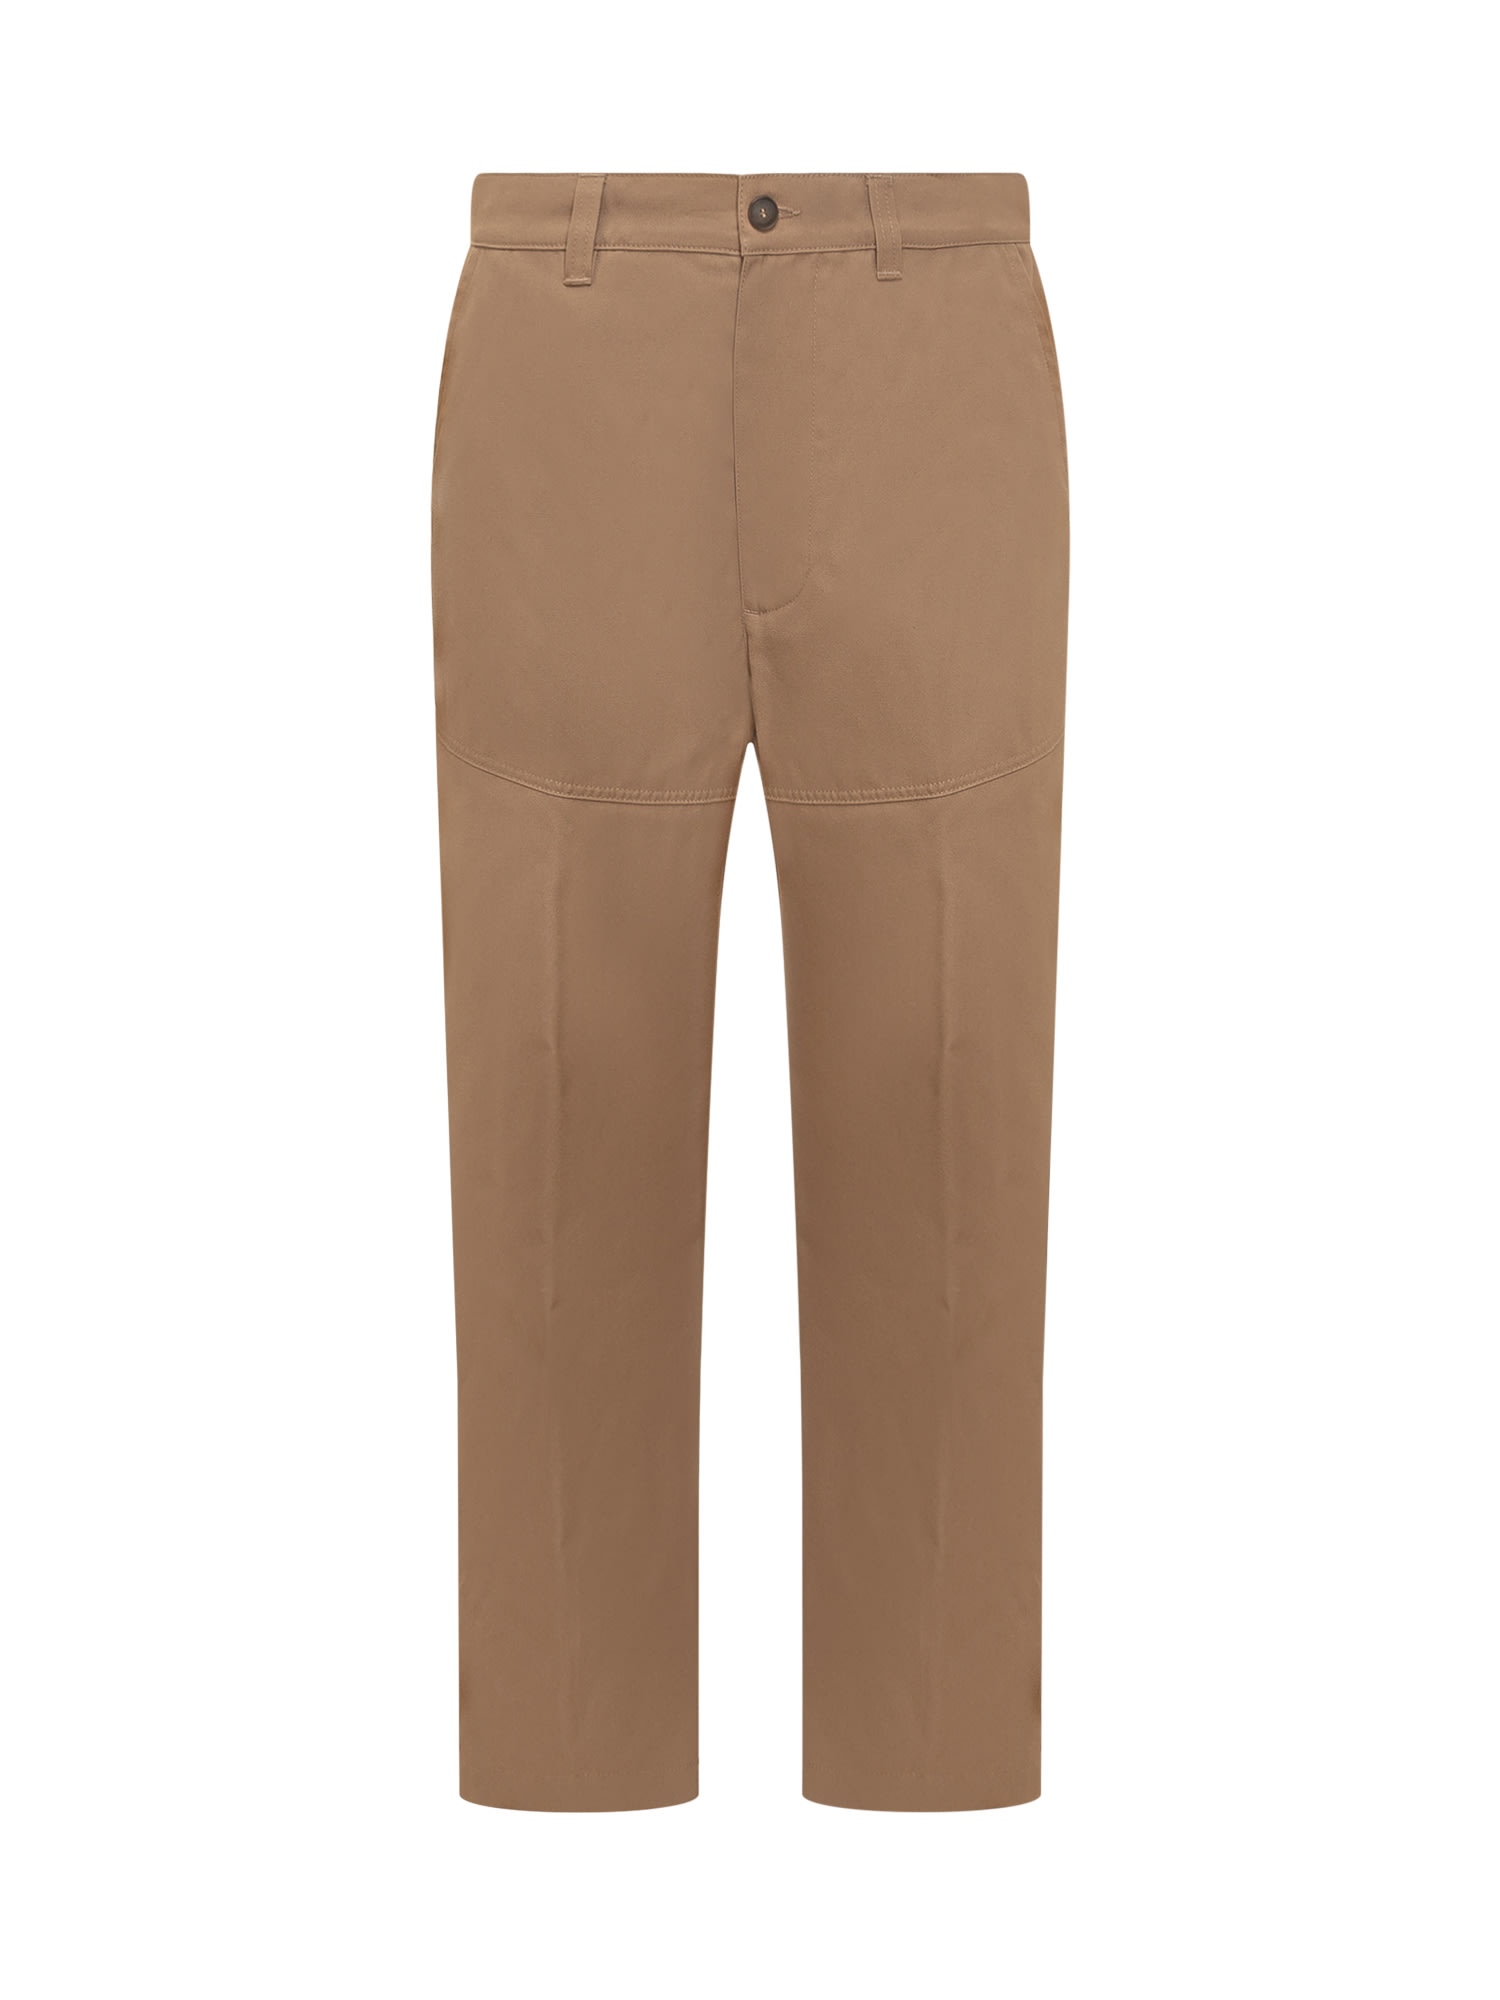 Shop The Seafarer Prospect Trousers In 8030